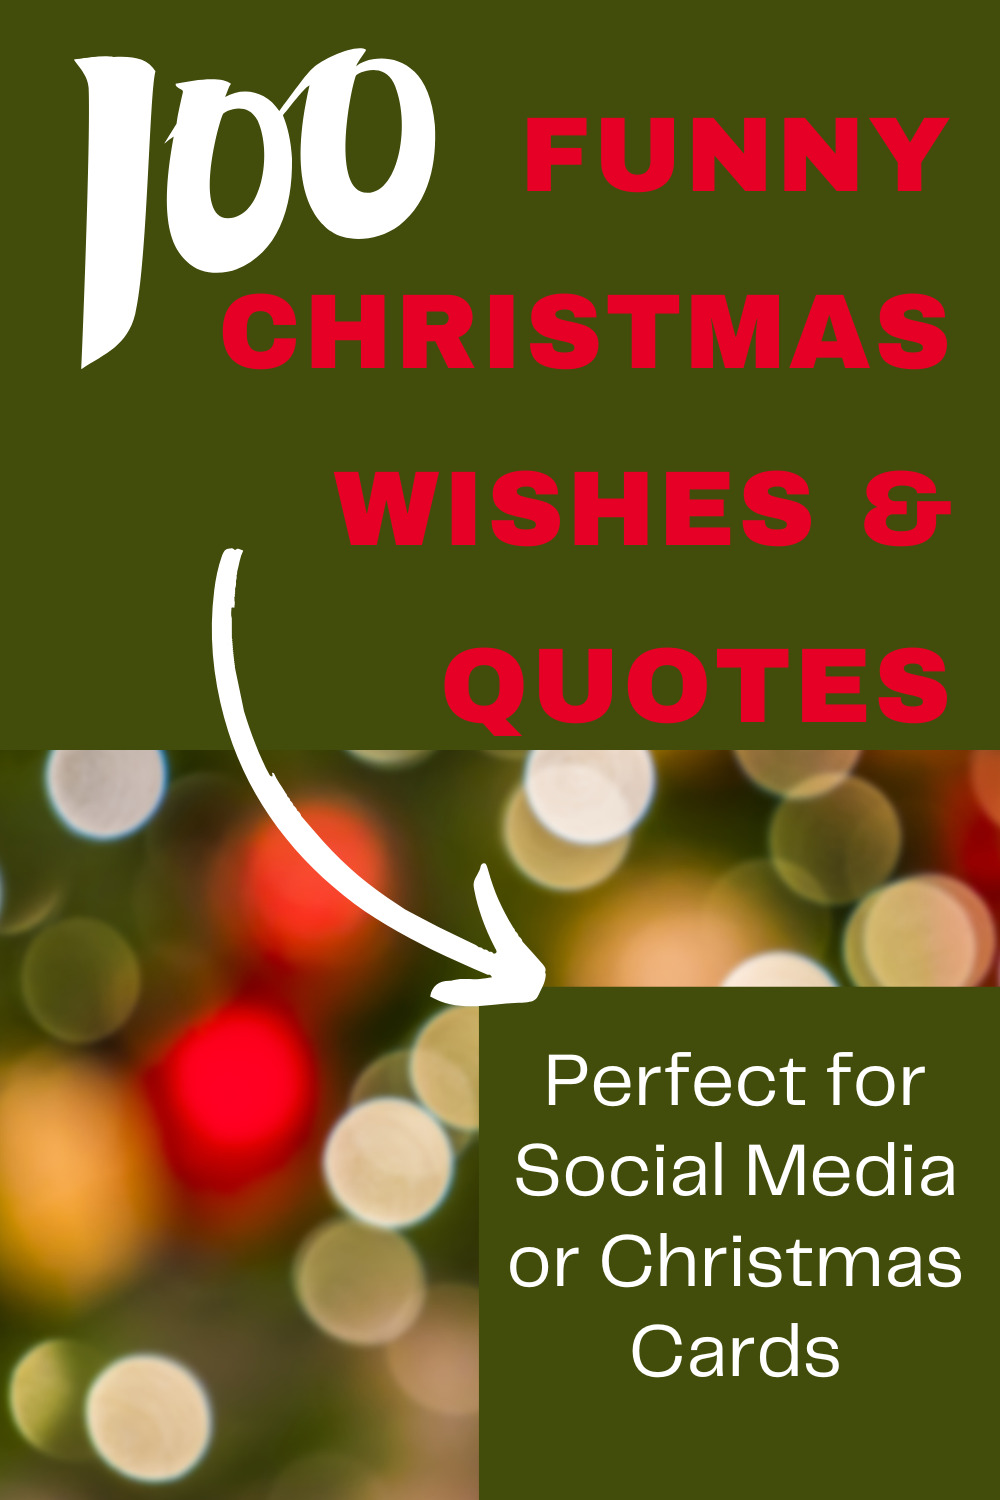 Funny Christmas Wishes and Quotes